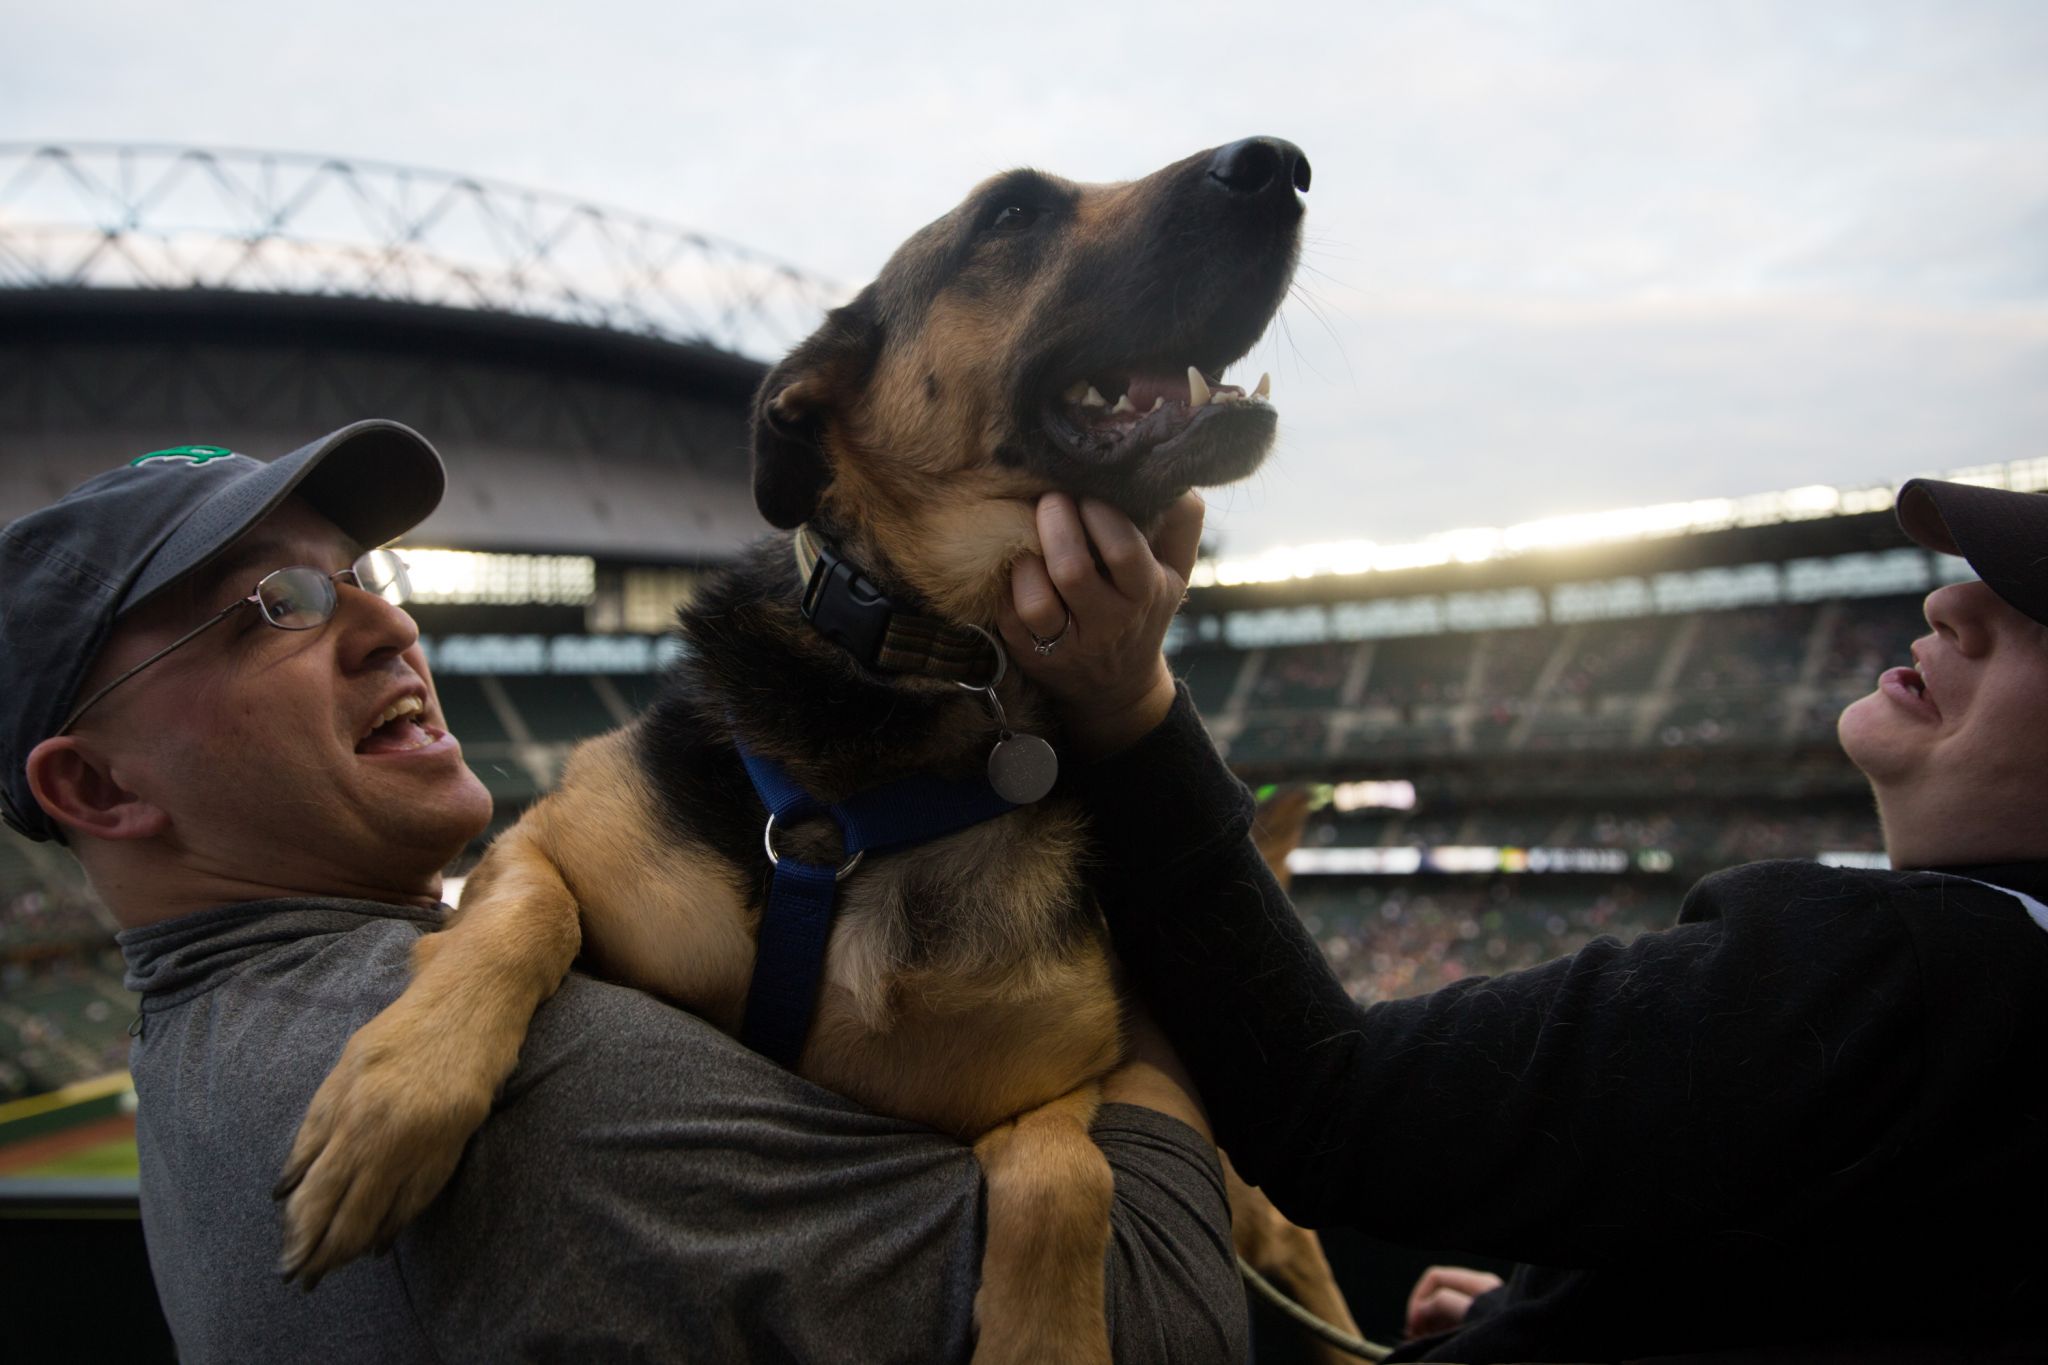 It's always a grrrrreat time at a @mariners Bark at the Park game